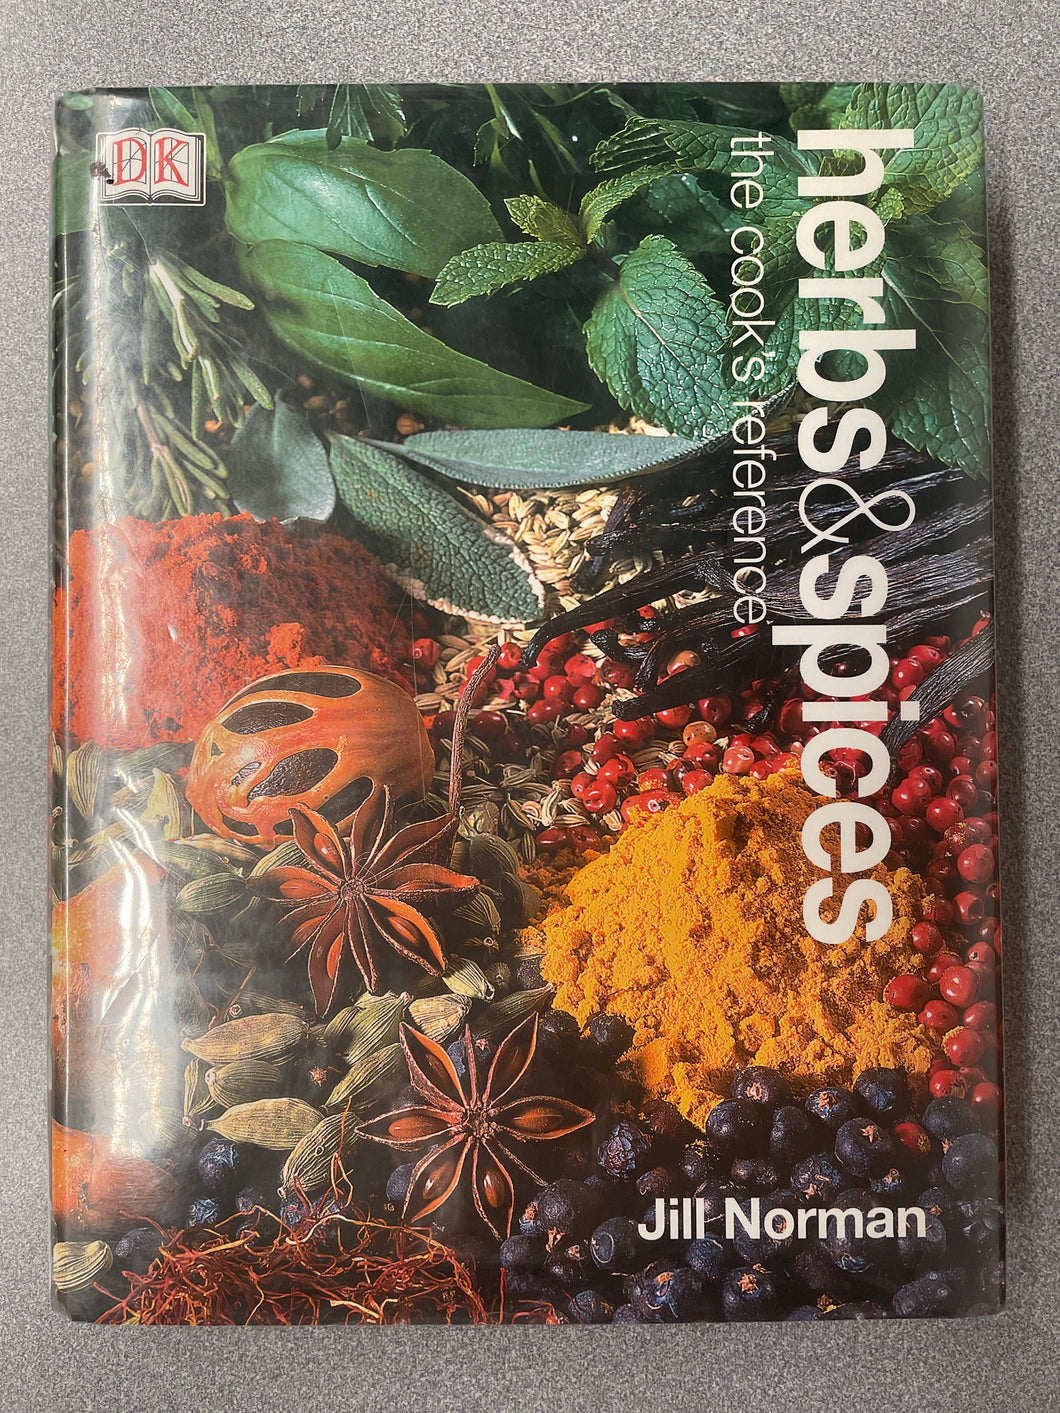 Herbs and Spices: The Cook's Reference, Norman, Jill [2002] CO 4/24